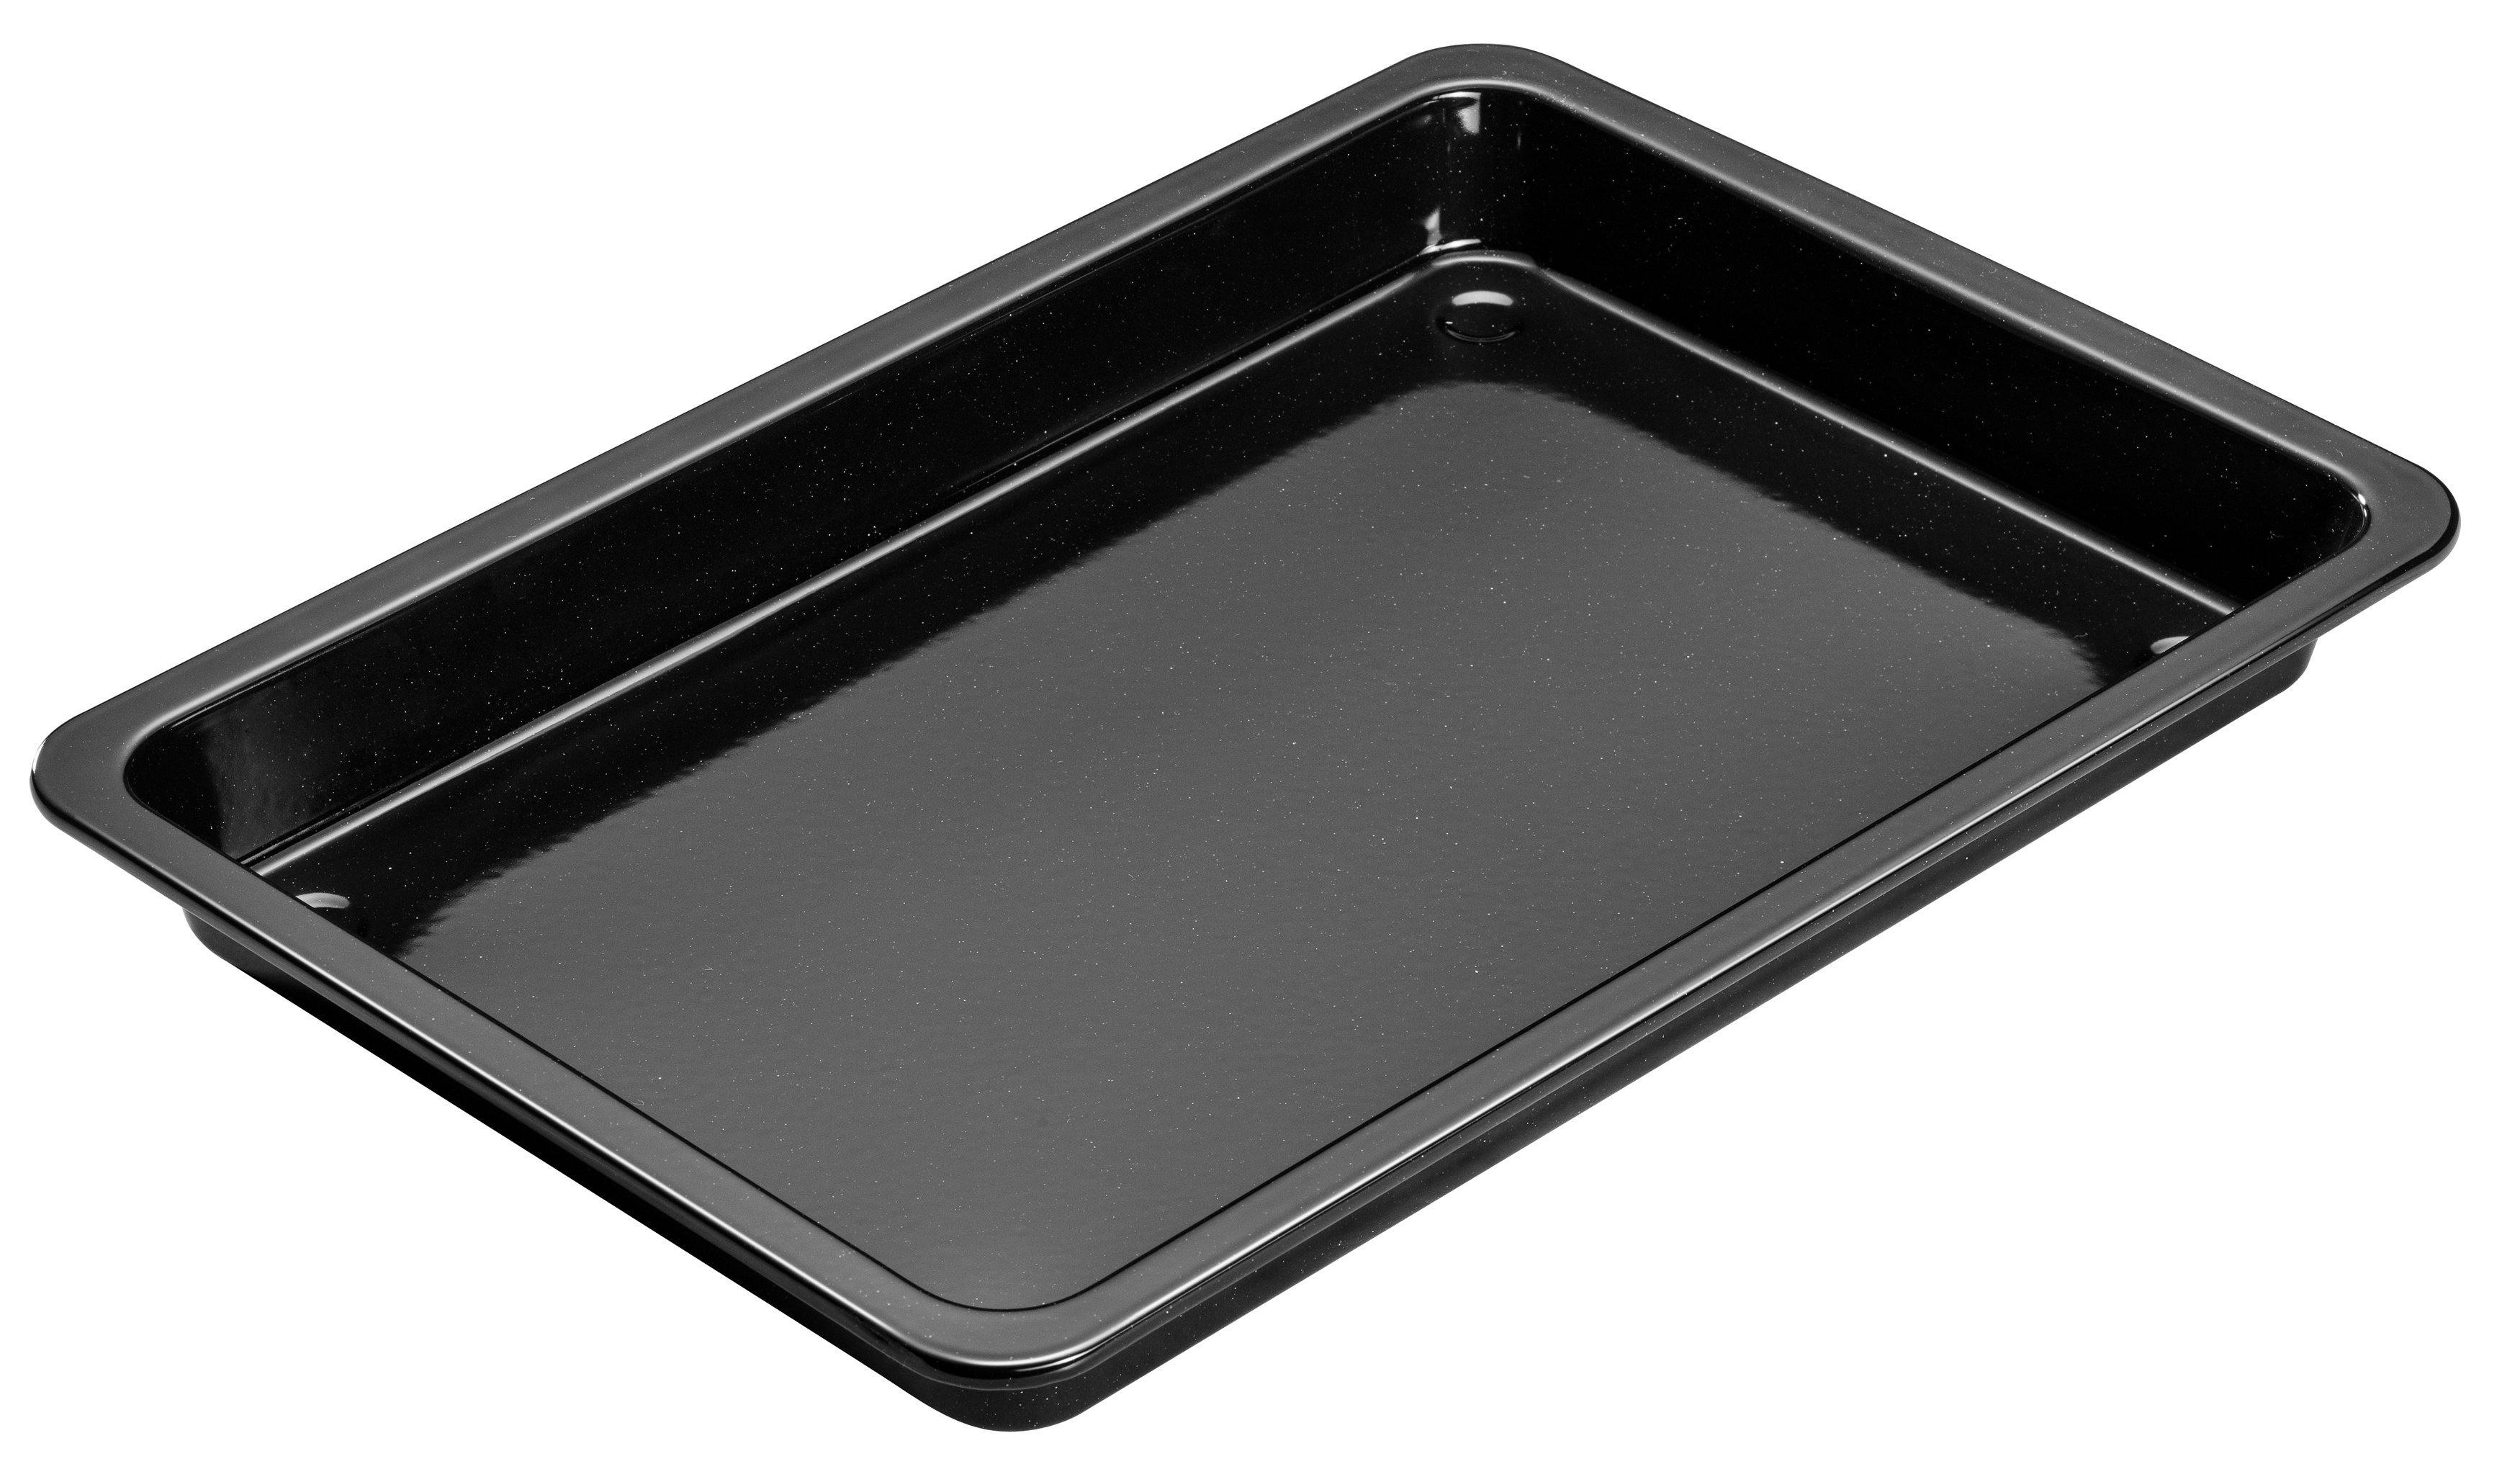 Dr. Oetker "Back-Idee Kreativ" Pizza And Baking Tray Enamel, Black, 42X29X4 Cm - Whole and All